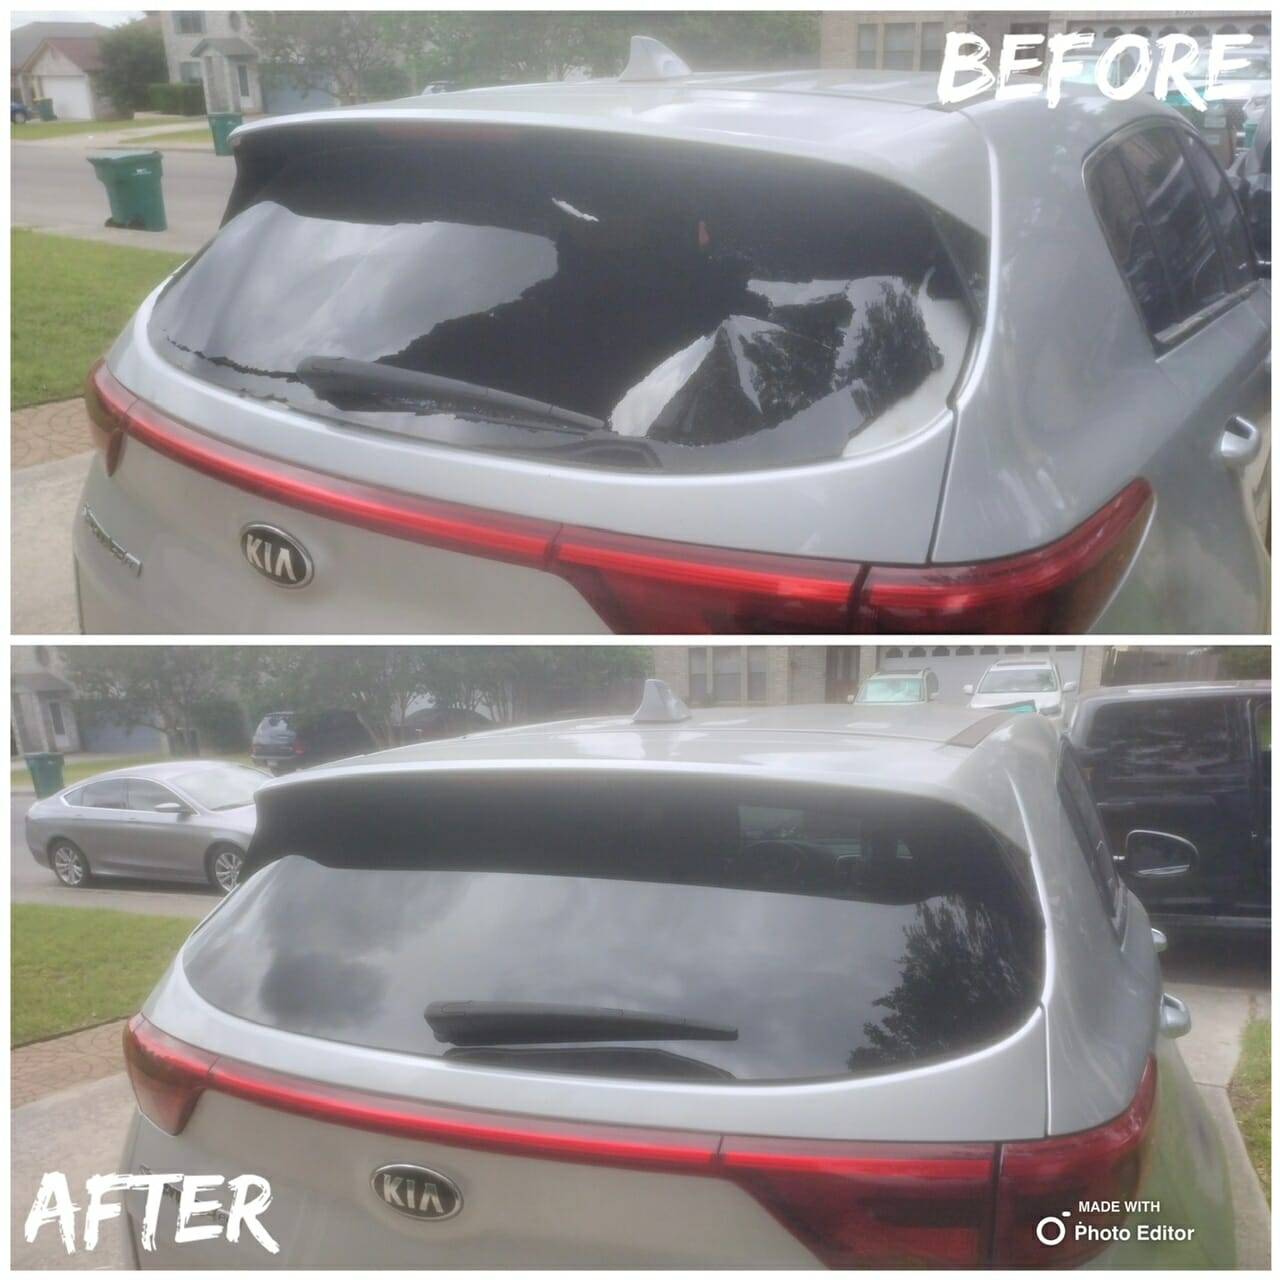 This before and after image demonstrates the successful repair of a Kia SUV's rear windshield at the UTSA campus in San Antonio, Texas. The top half features the damaged back glass with the entire center smashed in due to vandalism. The bottom half presents the SUV after the repair, fitted with a new, clear, and intact back glass, emphasizing the quality and effectiveness of our windshield replacement service in the San Antonio area, even on university campuses.